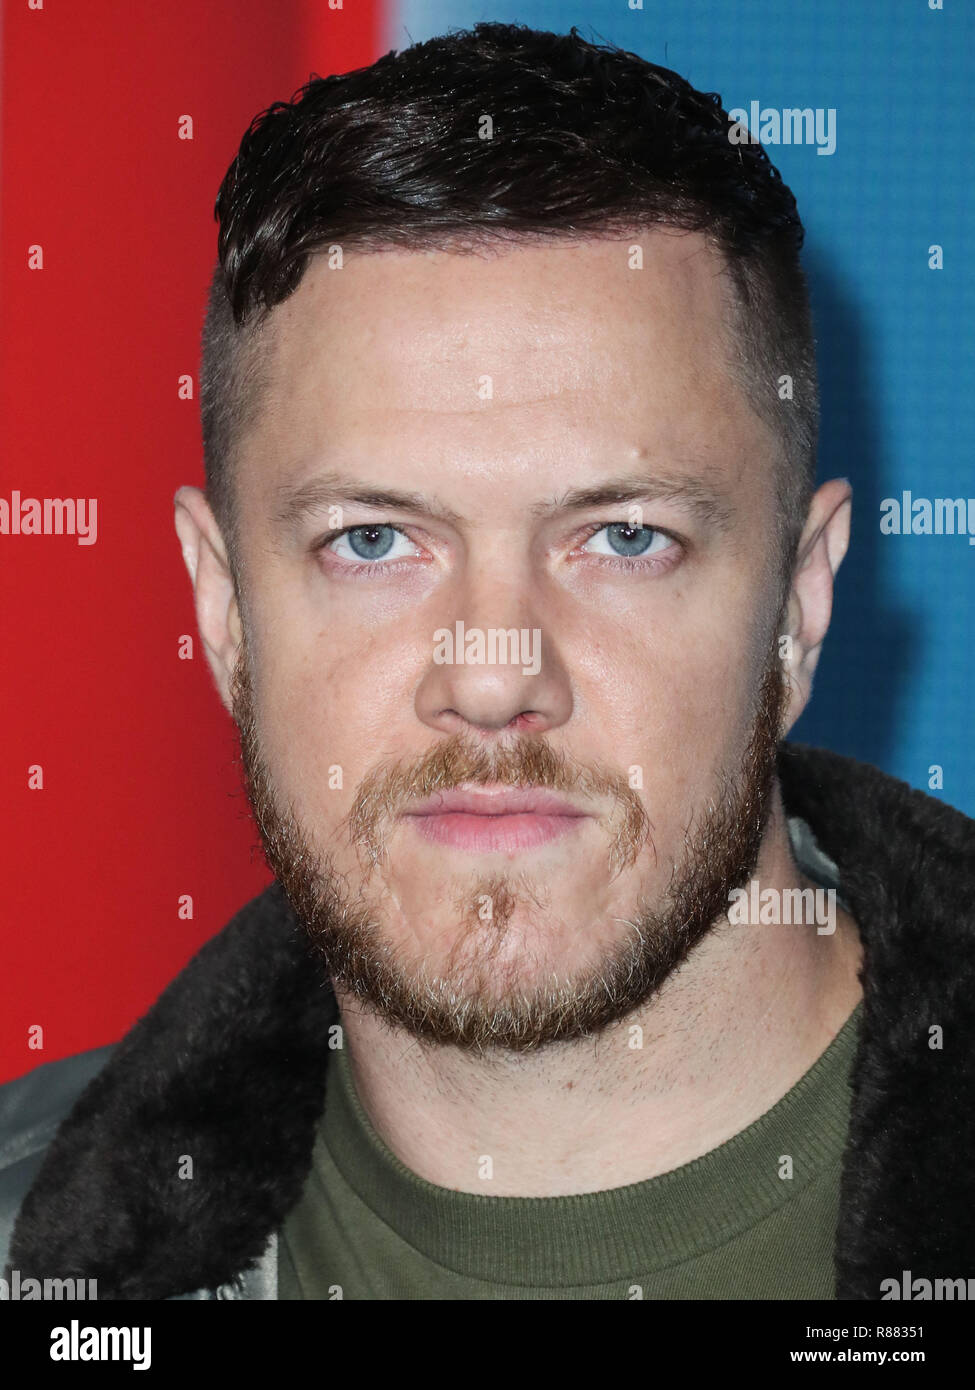 HOLLYWOOD, LOS ANGELES, CA, USA - NOVEMBER 05: Dan Reynolds, Imagine Dragons at the World Premiere Of Disney's 'Ralph Breaks The Internet' held at the El Capitan Theatre on November 5, 2018 in Hollywood, Los Angeles, California, United States. (Photo by Xavier Collin/Image Press Agency) Stock Photo